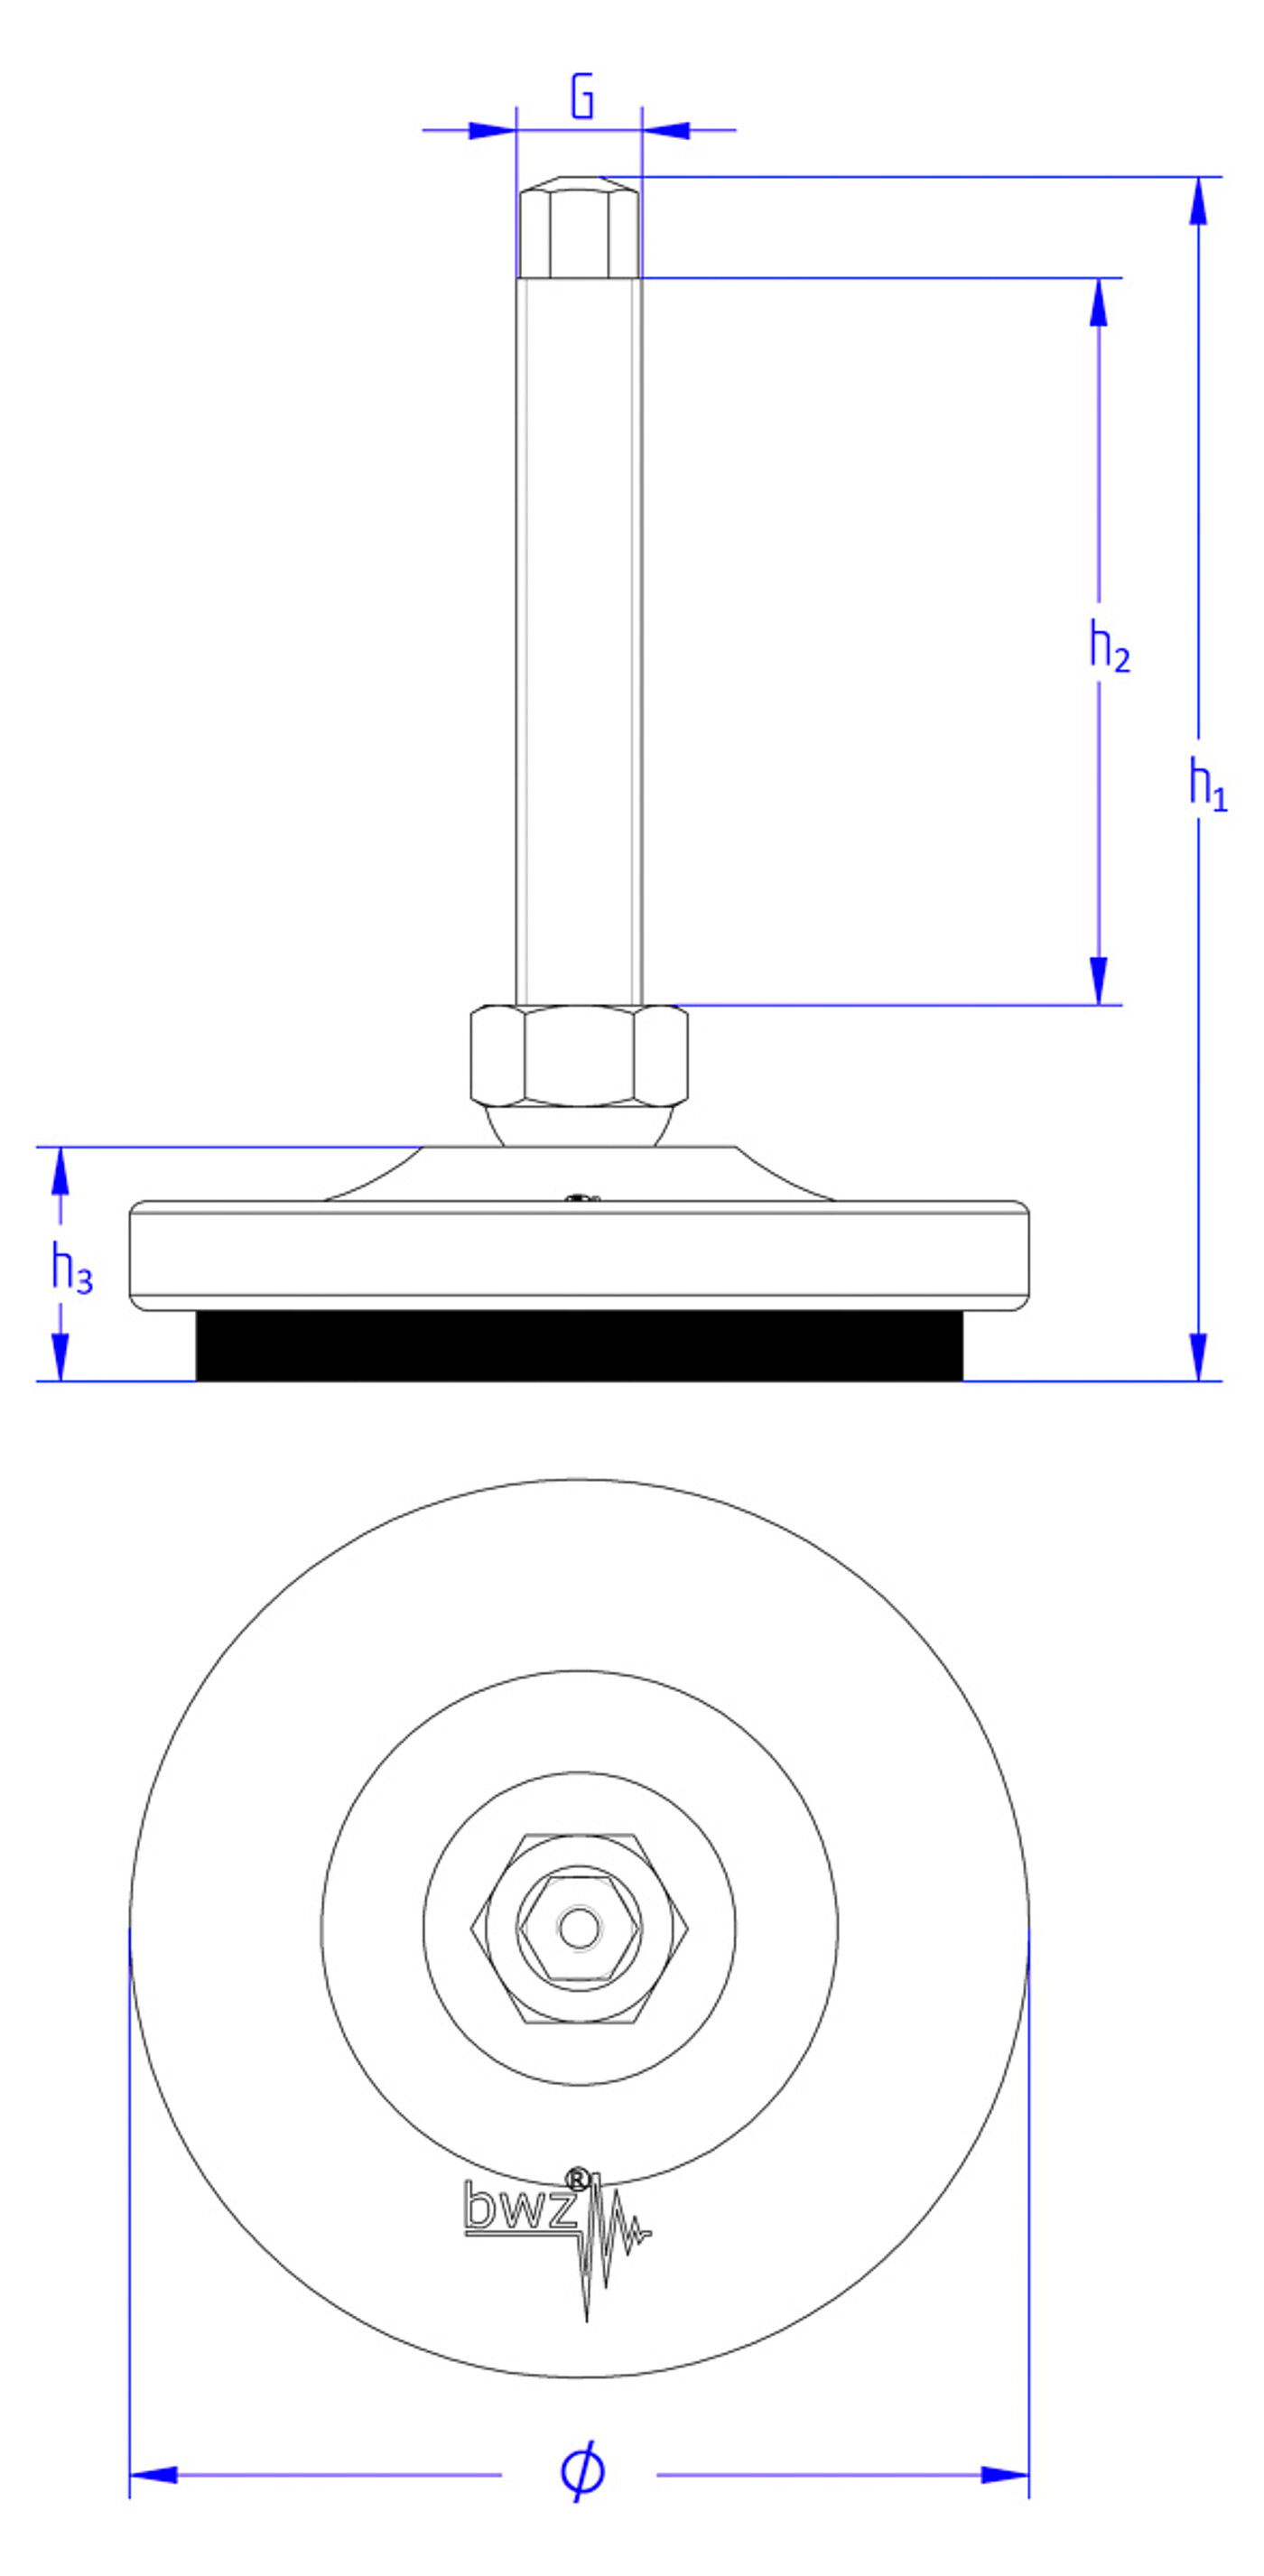 schematic drawing of a round levelling element made of cast iron, with a pendulum-action levelling screw with a hexagonal spanner flat at the top end, placed in a hexagonal cap nut sitting on top of the cast iron corpus, with the corpus and cap nut tightly connected to each other against falling apart, and elastomer for vibration damping at the bottom, in the side view and the view from the top